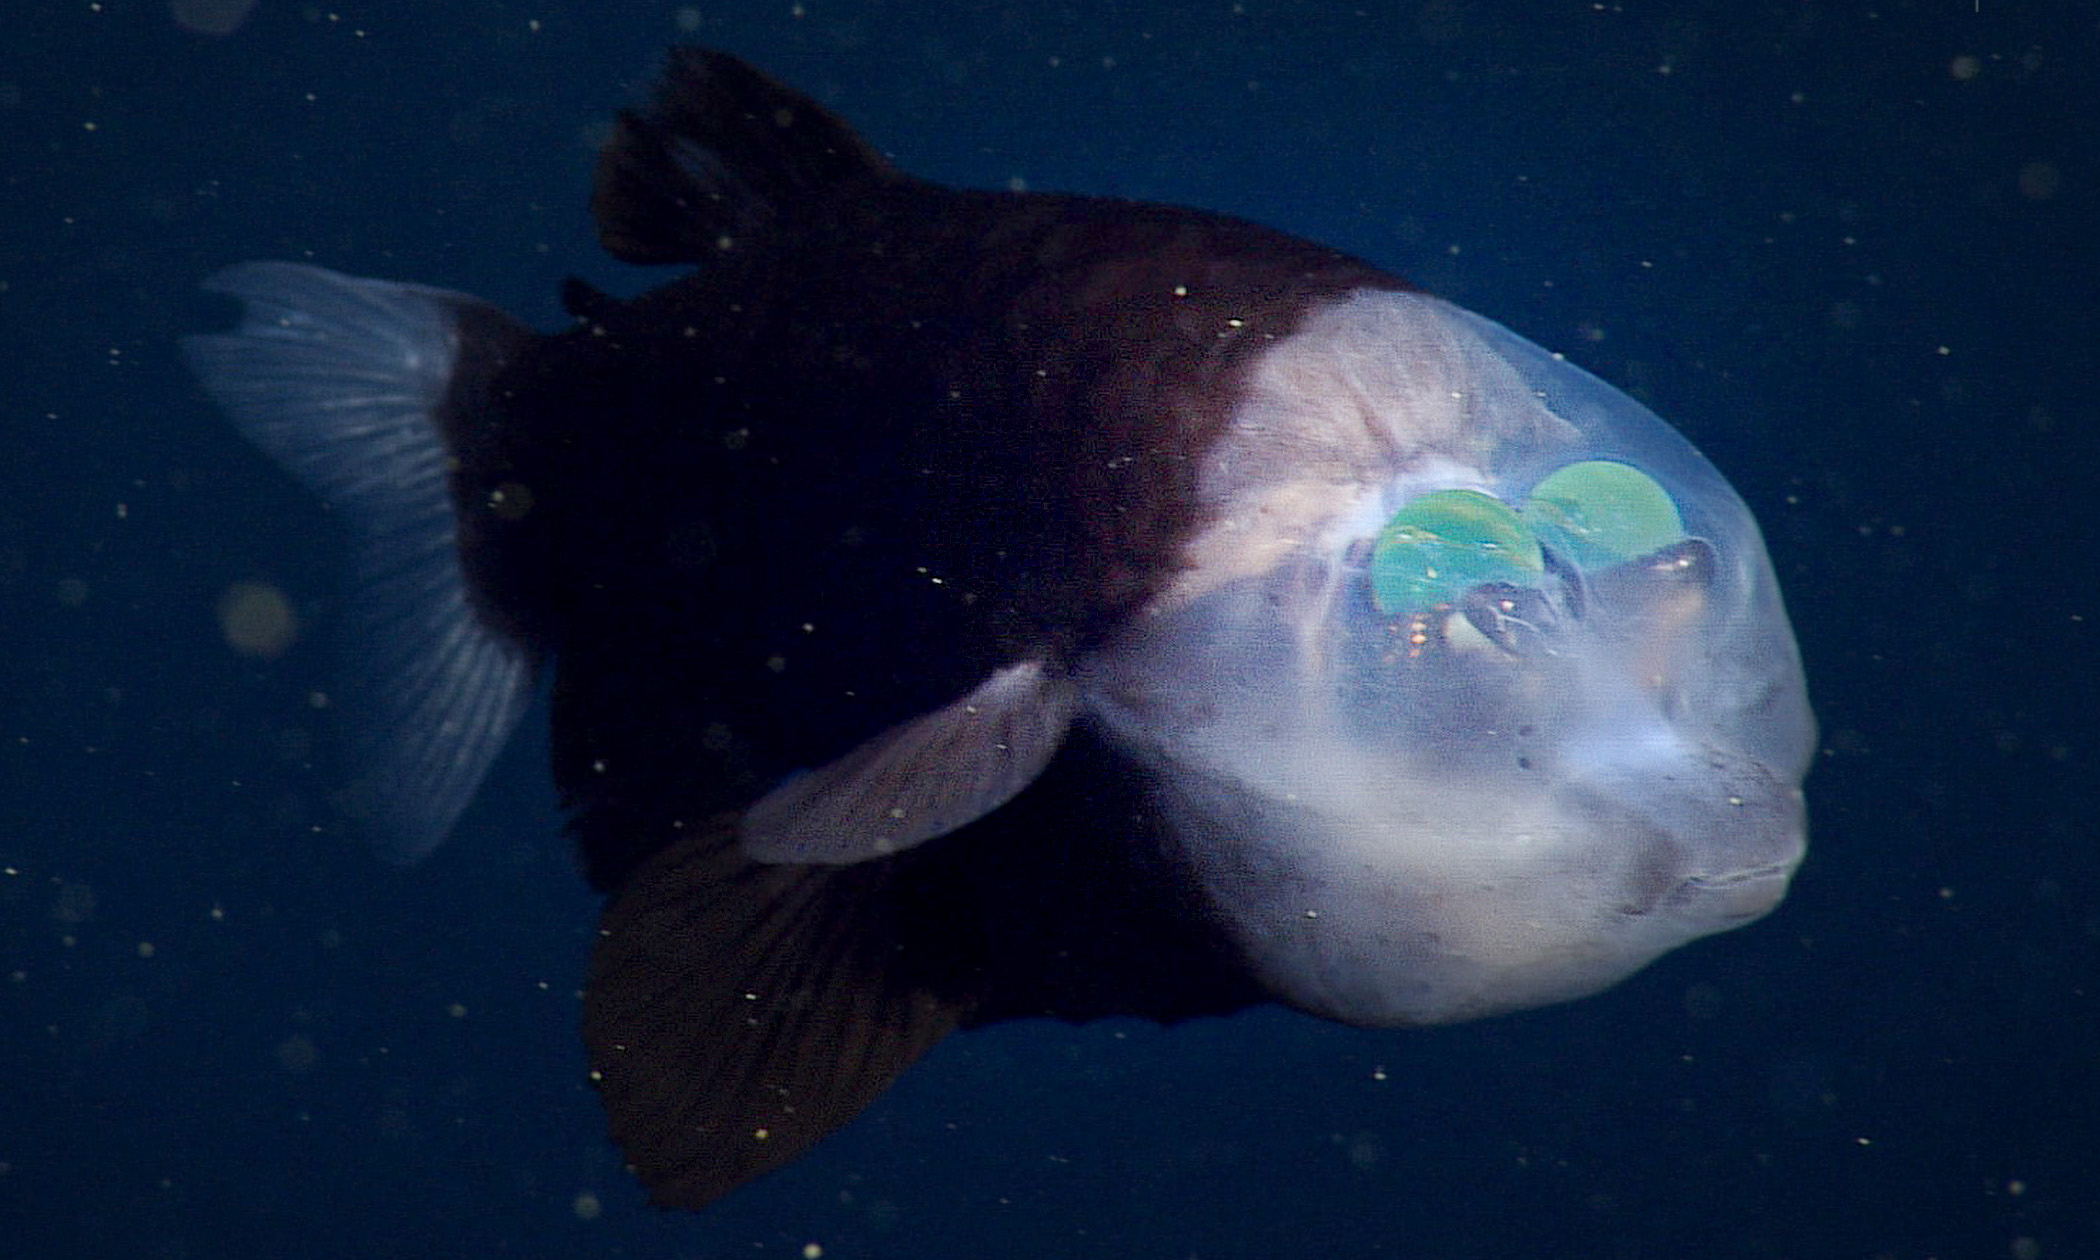 Mysterious Deep-Sea Fish With Glowing Green Eyes Inside